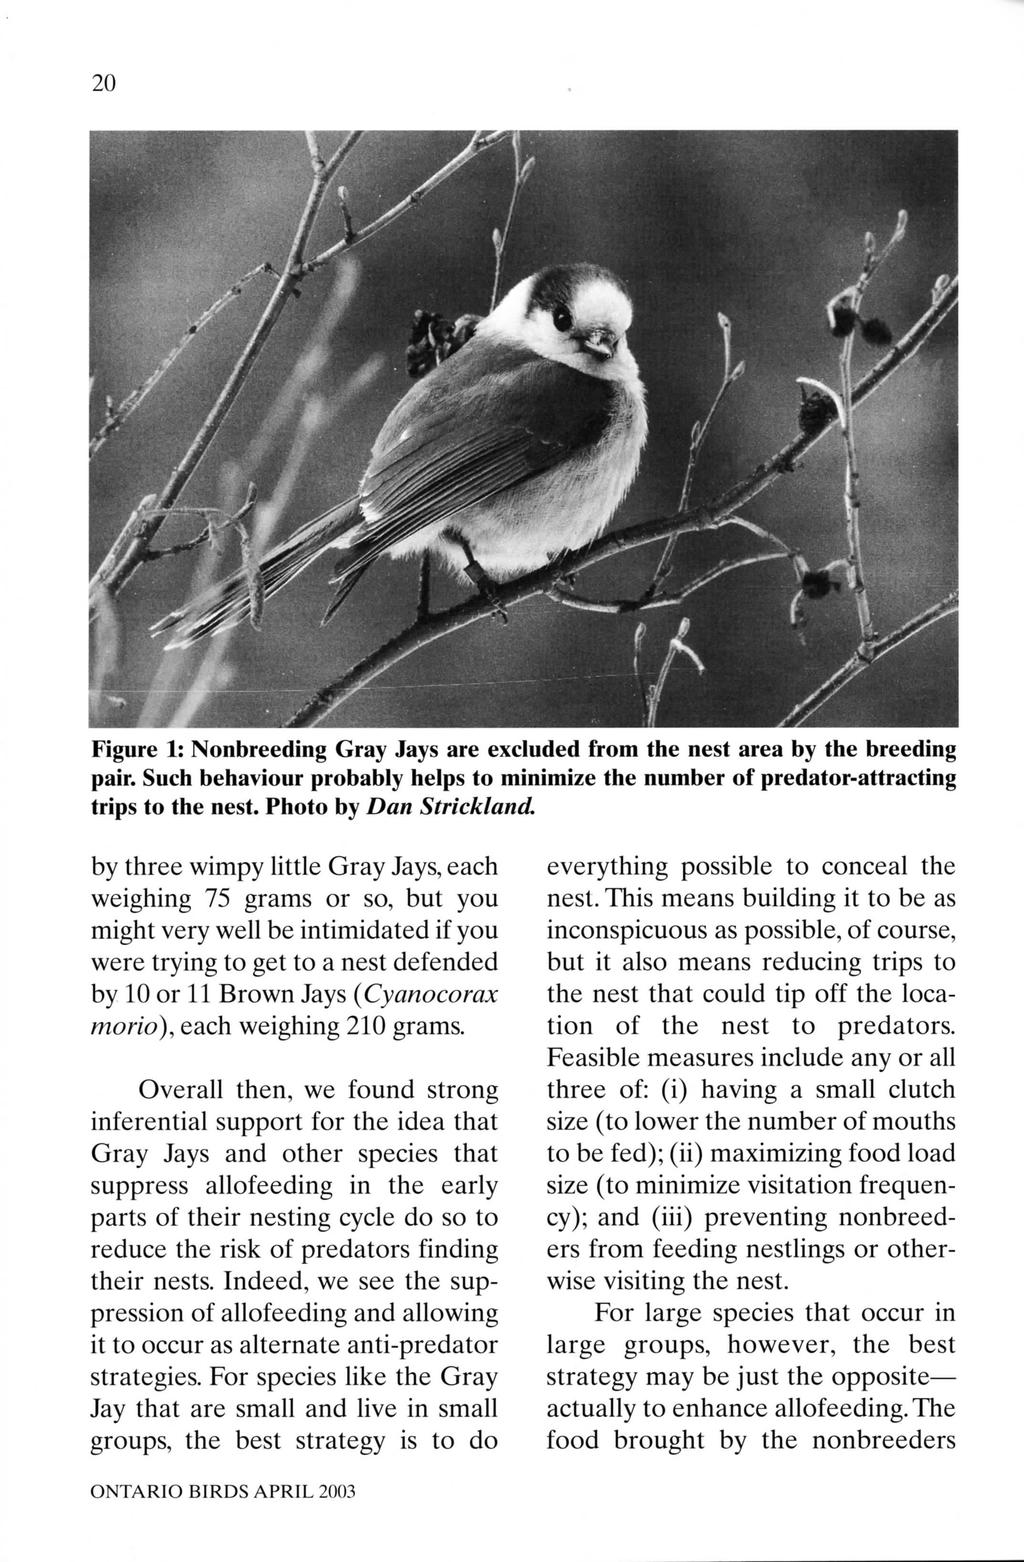 20 Figure 1: Nonbreeding Gray Jays are excluded from the nest area by the breeding pair. Such behaviour probably helps to minimize the number of predator-attracting trips to the nest.